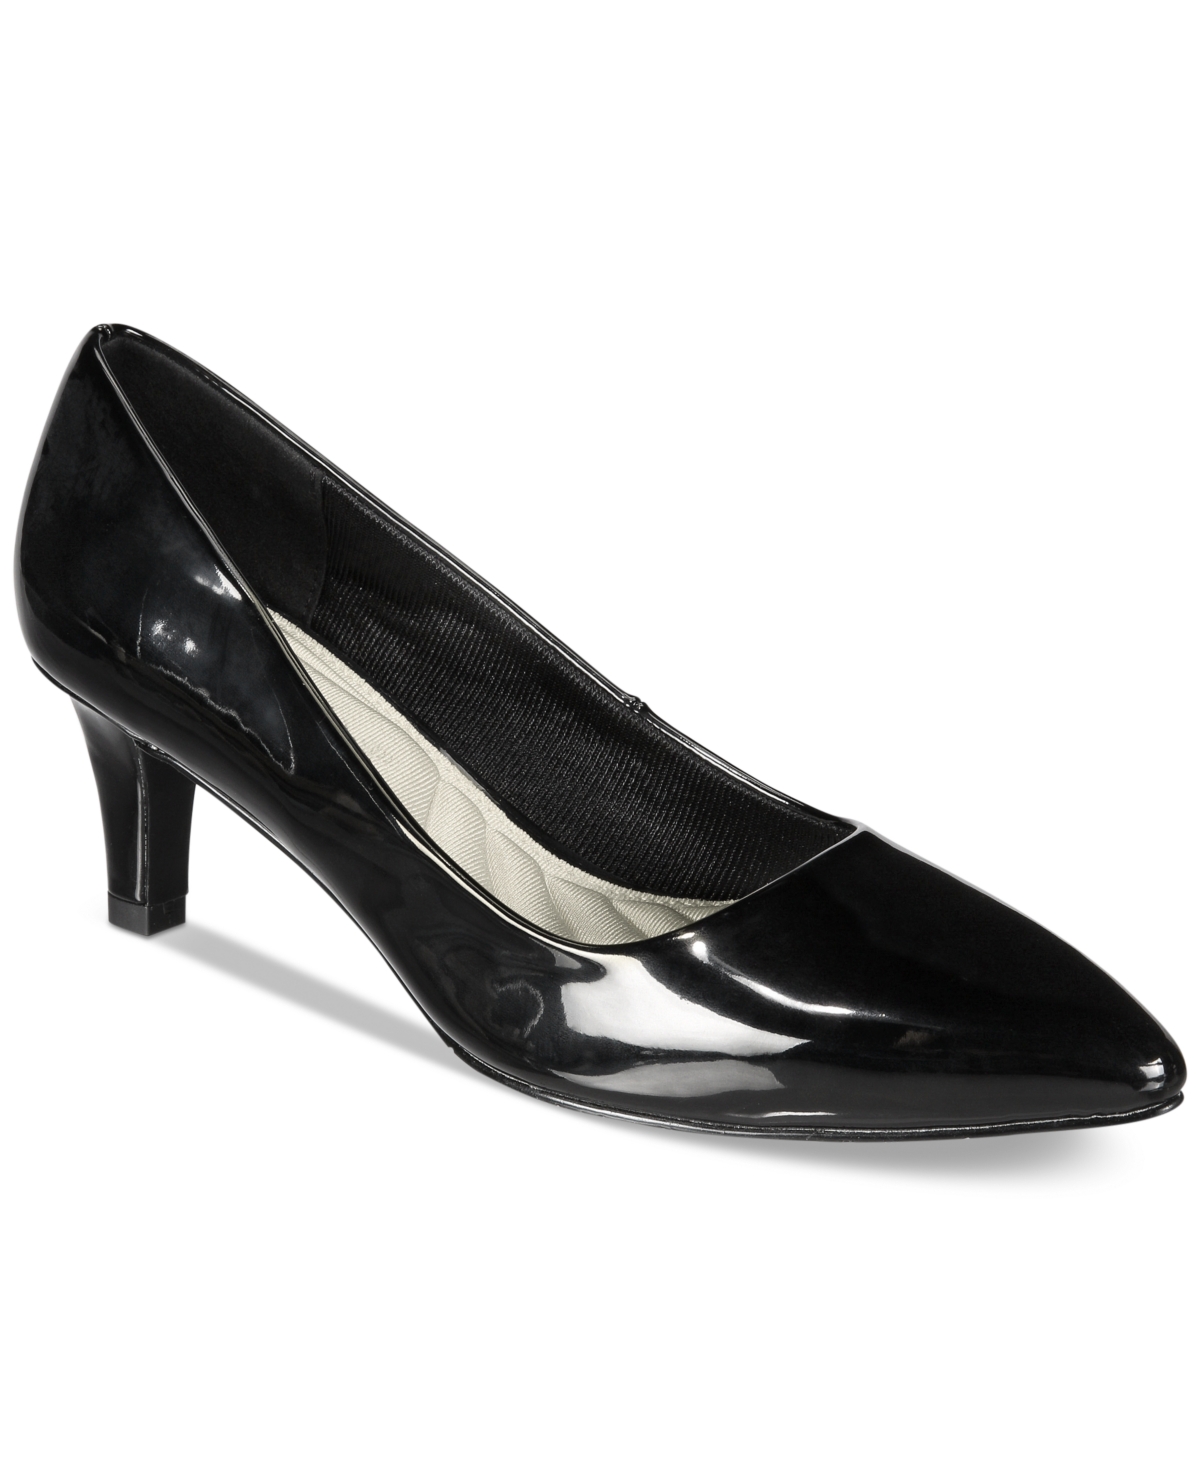 Easy Street Pointe Pumps Women's Shoes